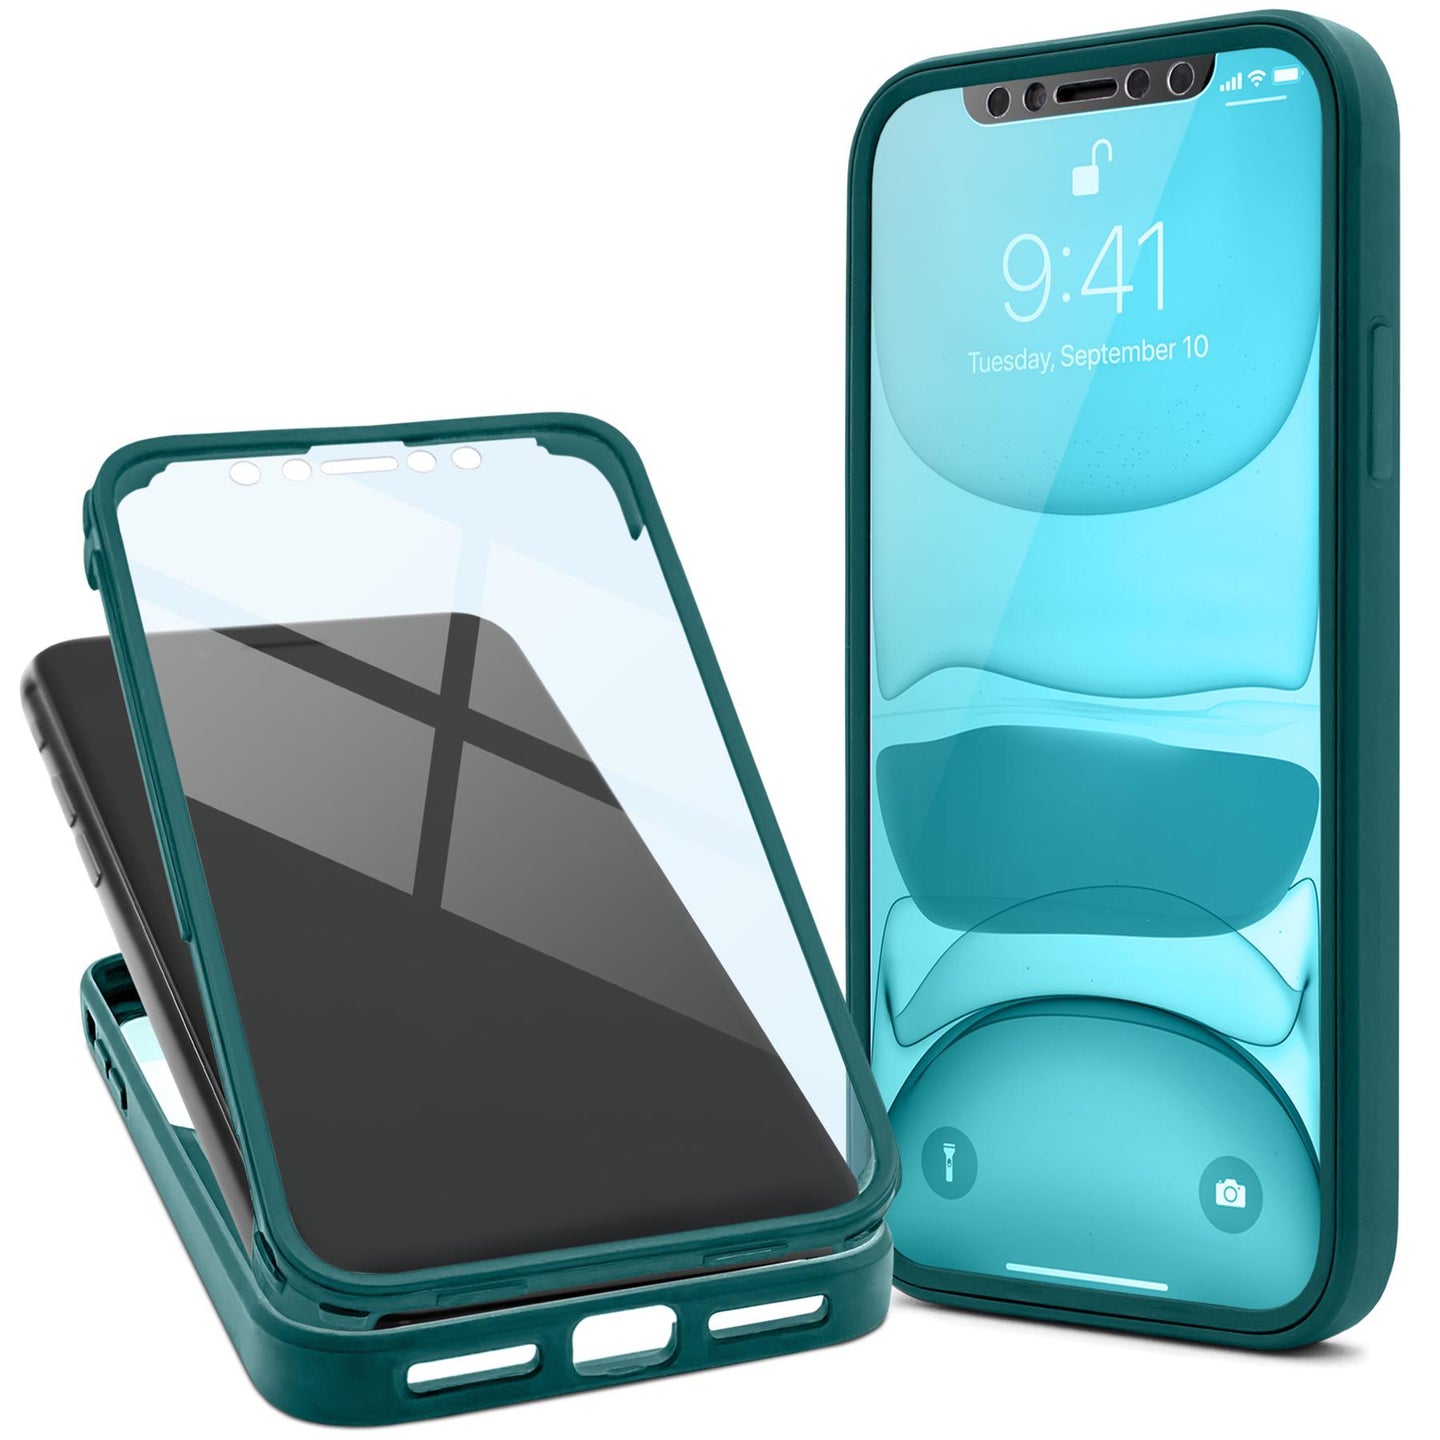 Moozy 360 Case for iPhone 11 - Green Rim Transparent Case, Full Body Double-sided Protection, Cover with Built-in Screen Protector